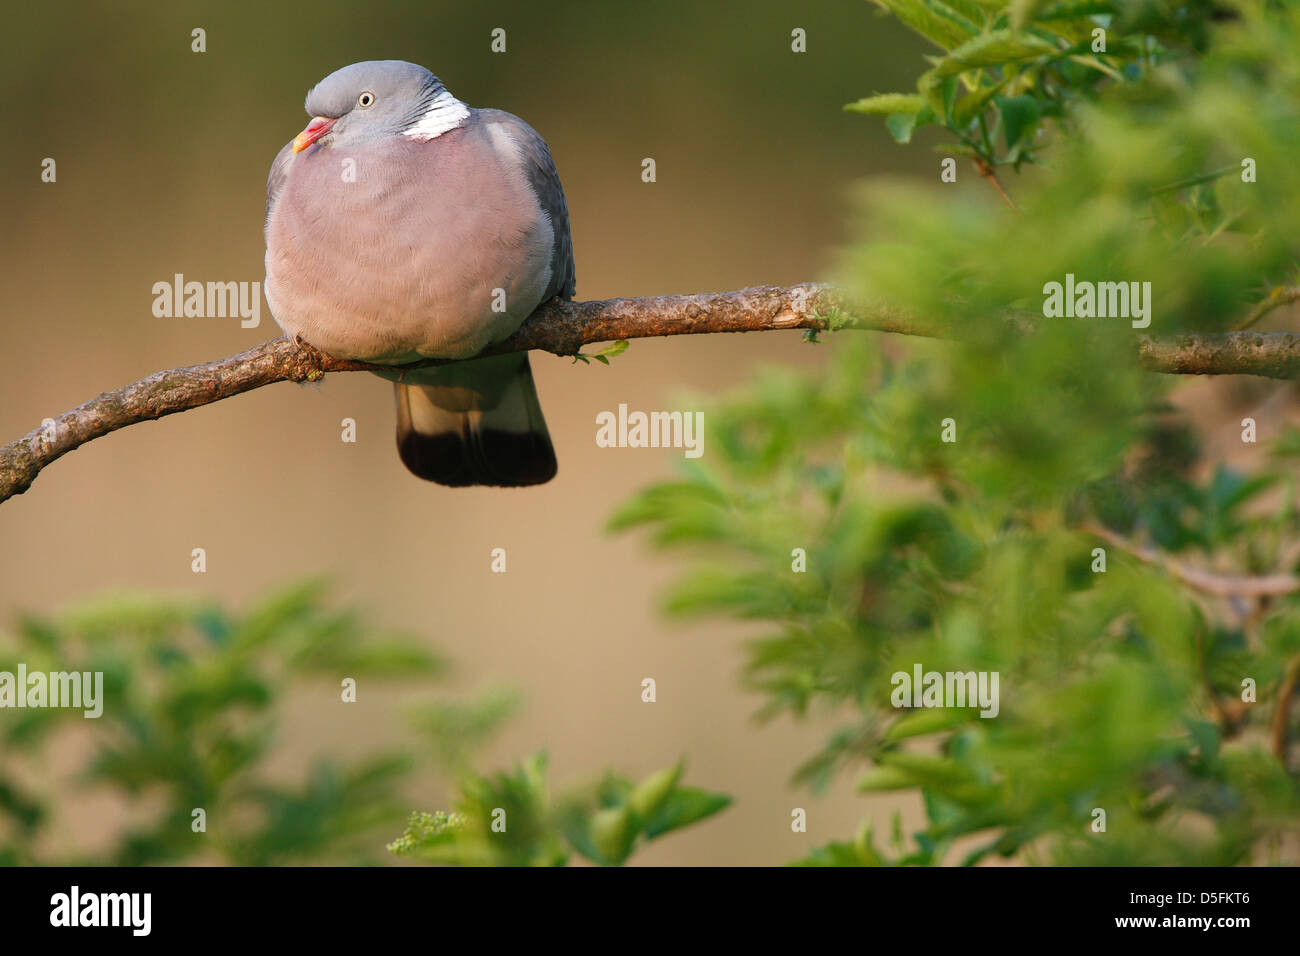 Common Wood Pigeon (Columba palumbus) perched in tree Stock Photo